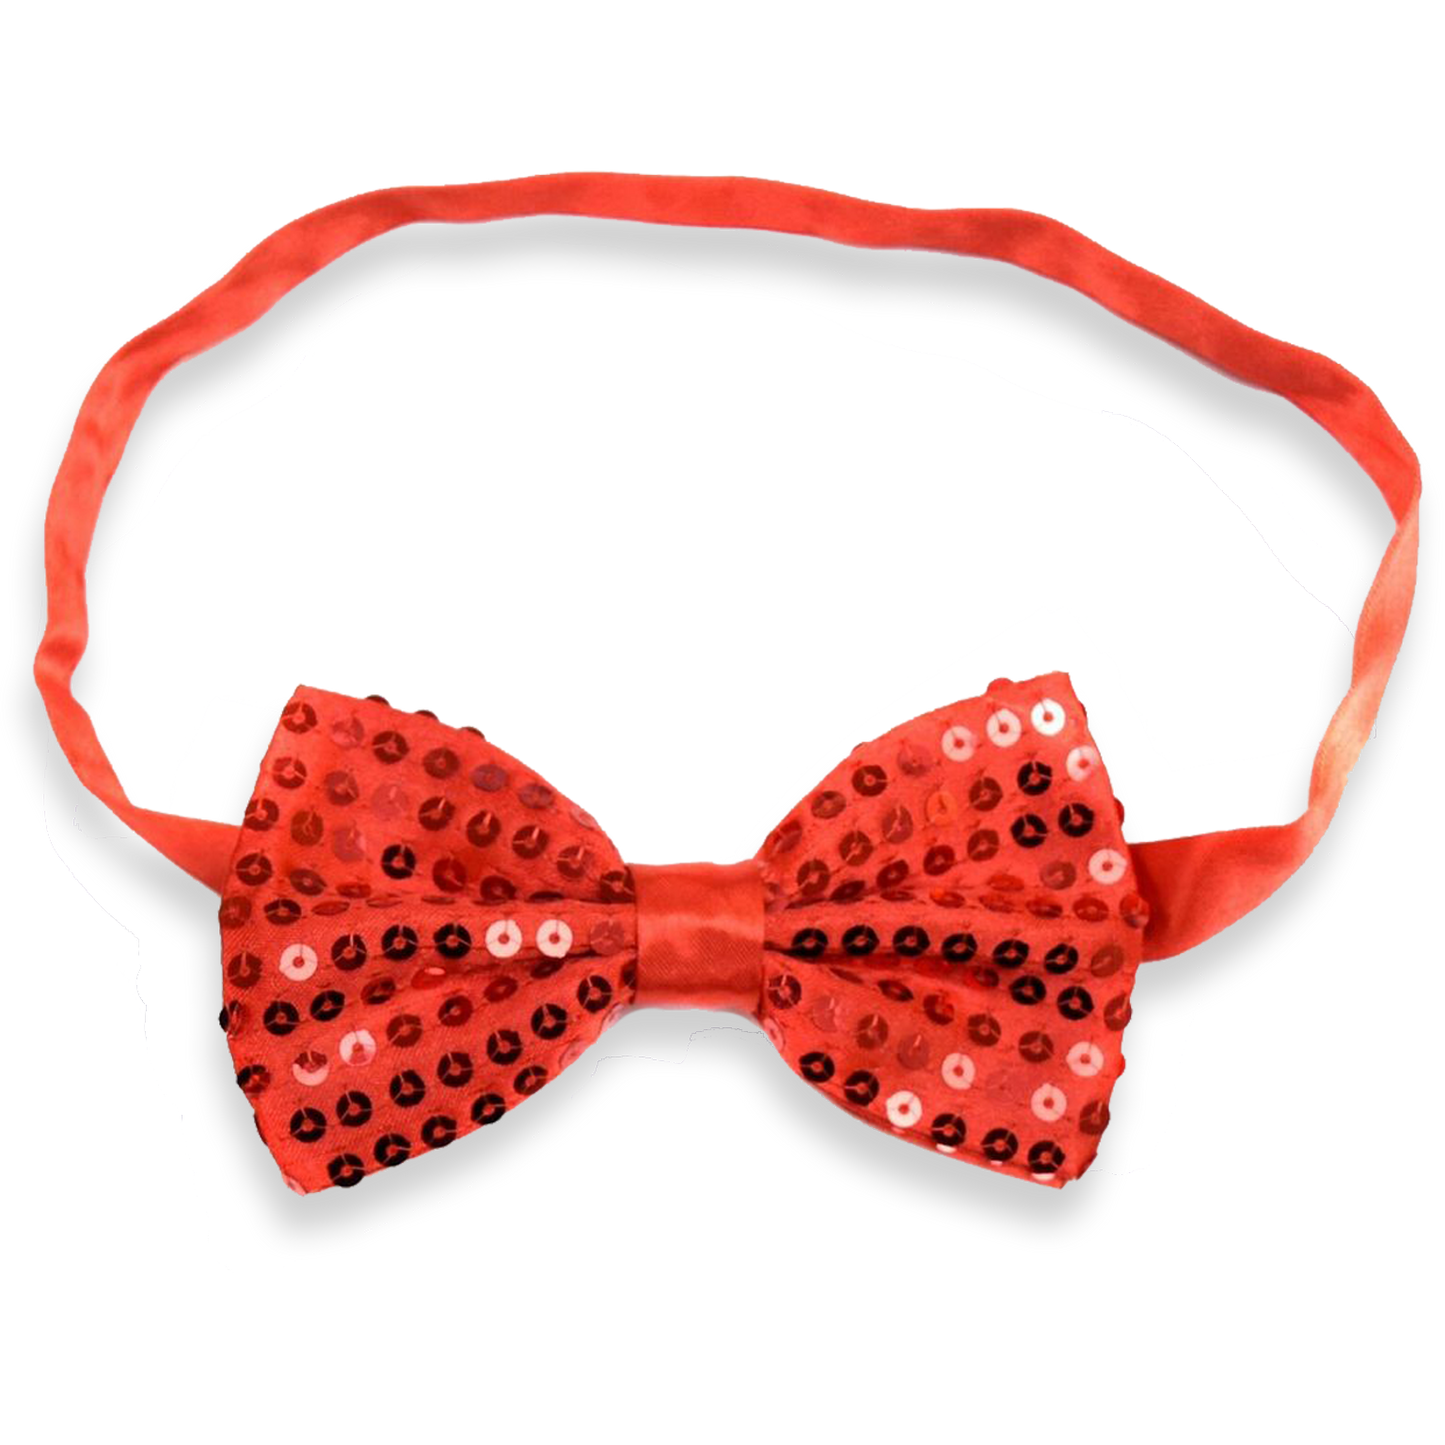 Sequin Satin Red Shiny Bow Tie Dickie Show Sparkly Fancy Dress Magic Mens Boys